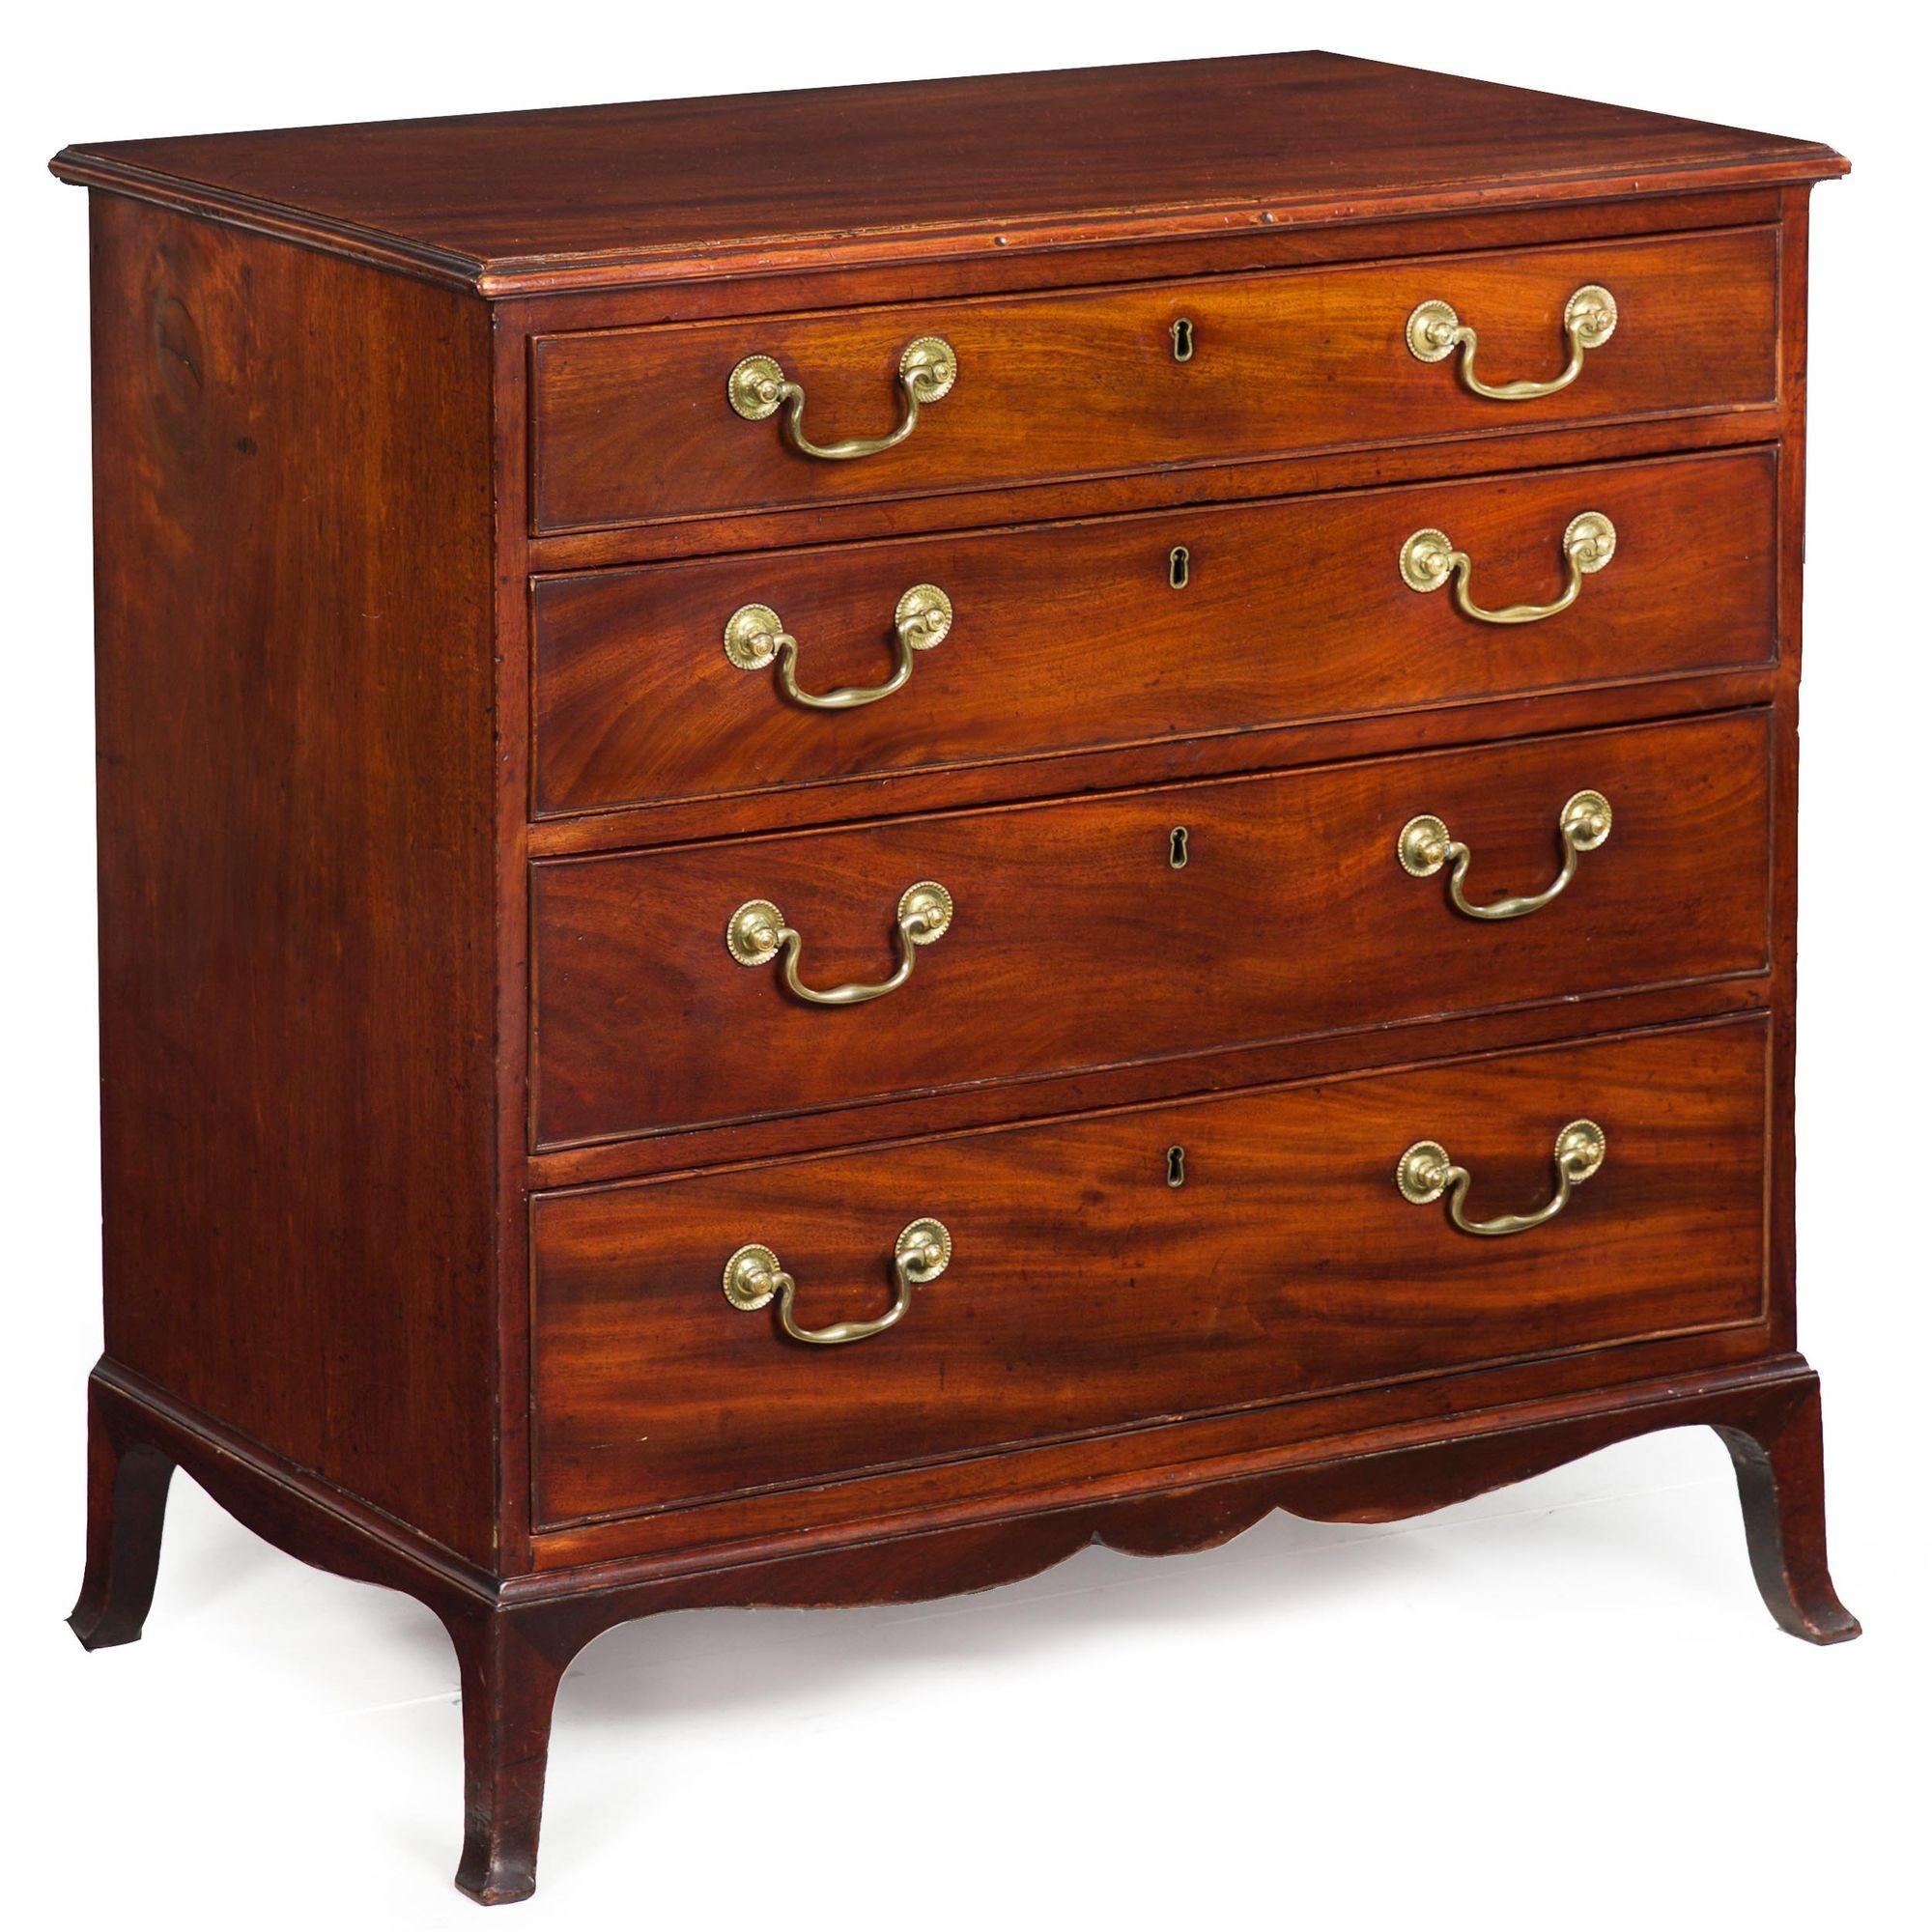 A very fine and most attractive George III period chest of drawers circa 1790, it features a rectangular overall form and excellent balance of proportions that allow it to be neither heavy or delicate in lines. Executed entirely in mahogany and